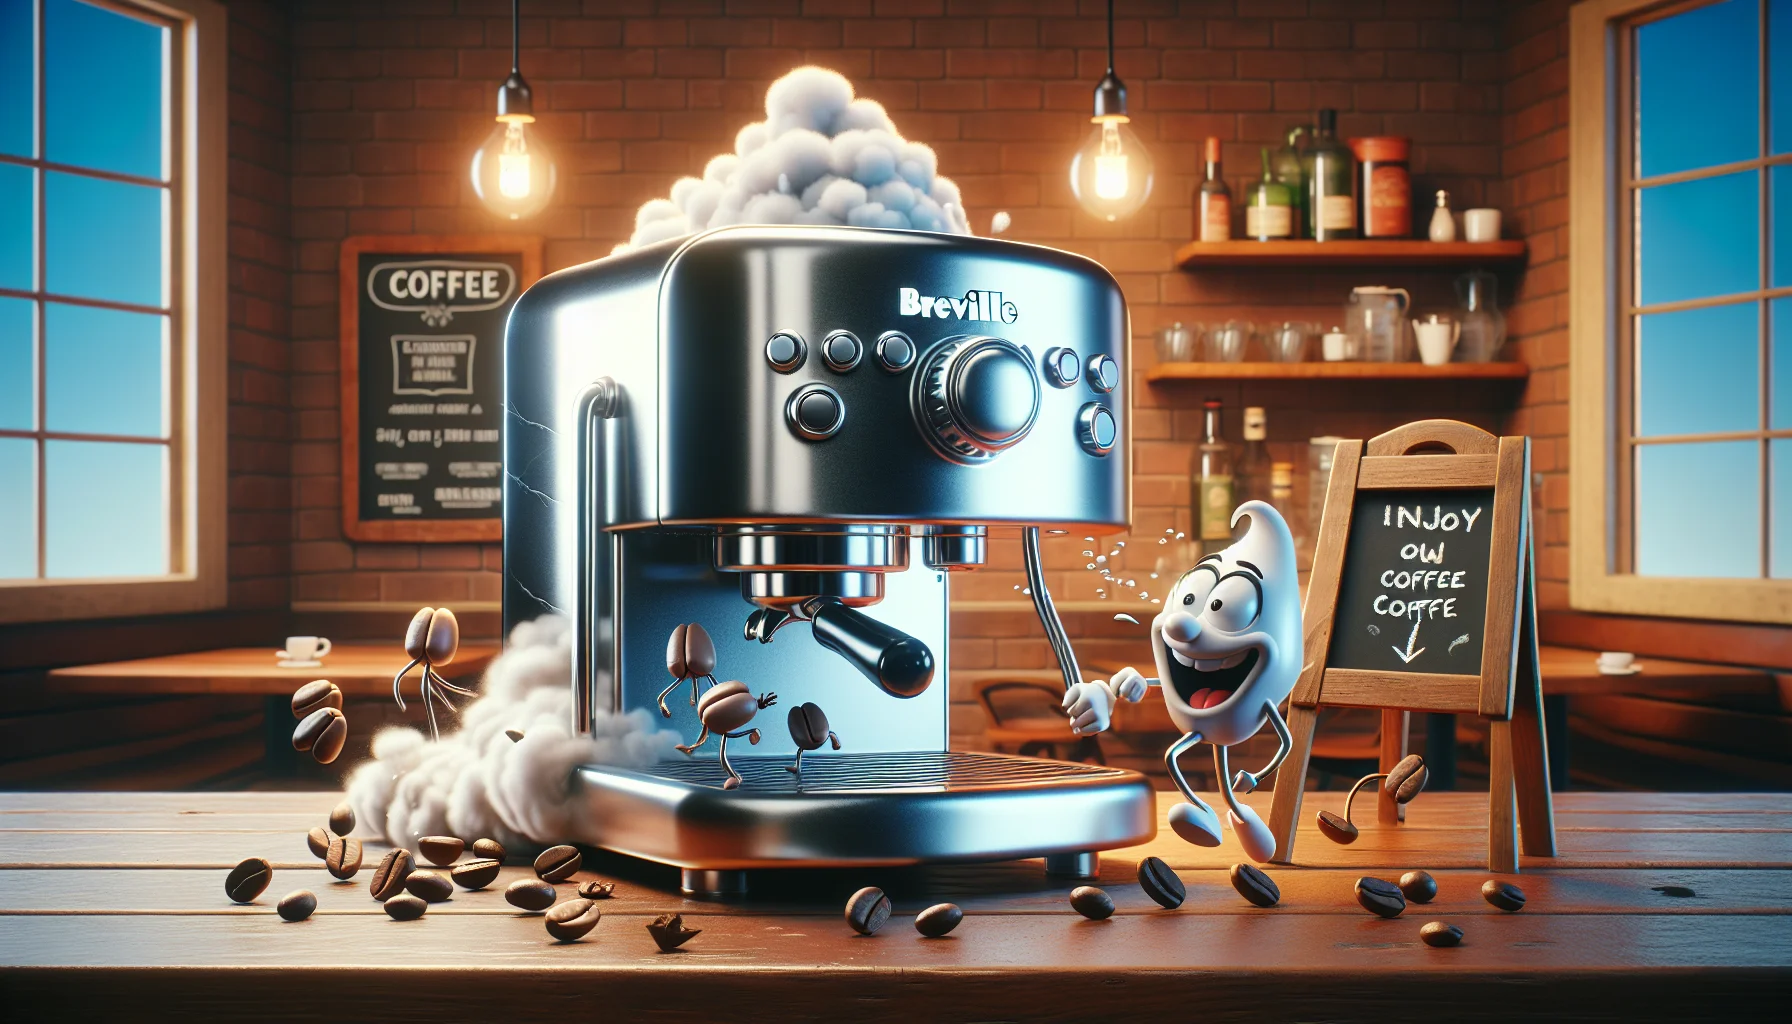 Imagine a humorous scenario depicting a shiny, Breville espresso machine in the midst of descaling. Perhaps there's steam whistling from its spout, and tiny, animated coffee beans are fleeing in amusement. On the side, a chalkboard sign stands, cheerfully inviting people to enjoy a freshly brewed coffee. The background reveals a cozy and warm cafe ambiance with brick walls, hanging light bulbs, and retro signage. The overall style should have a warmth and realism that evokes a smile.